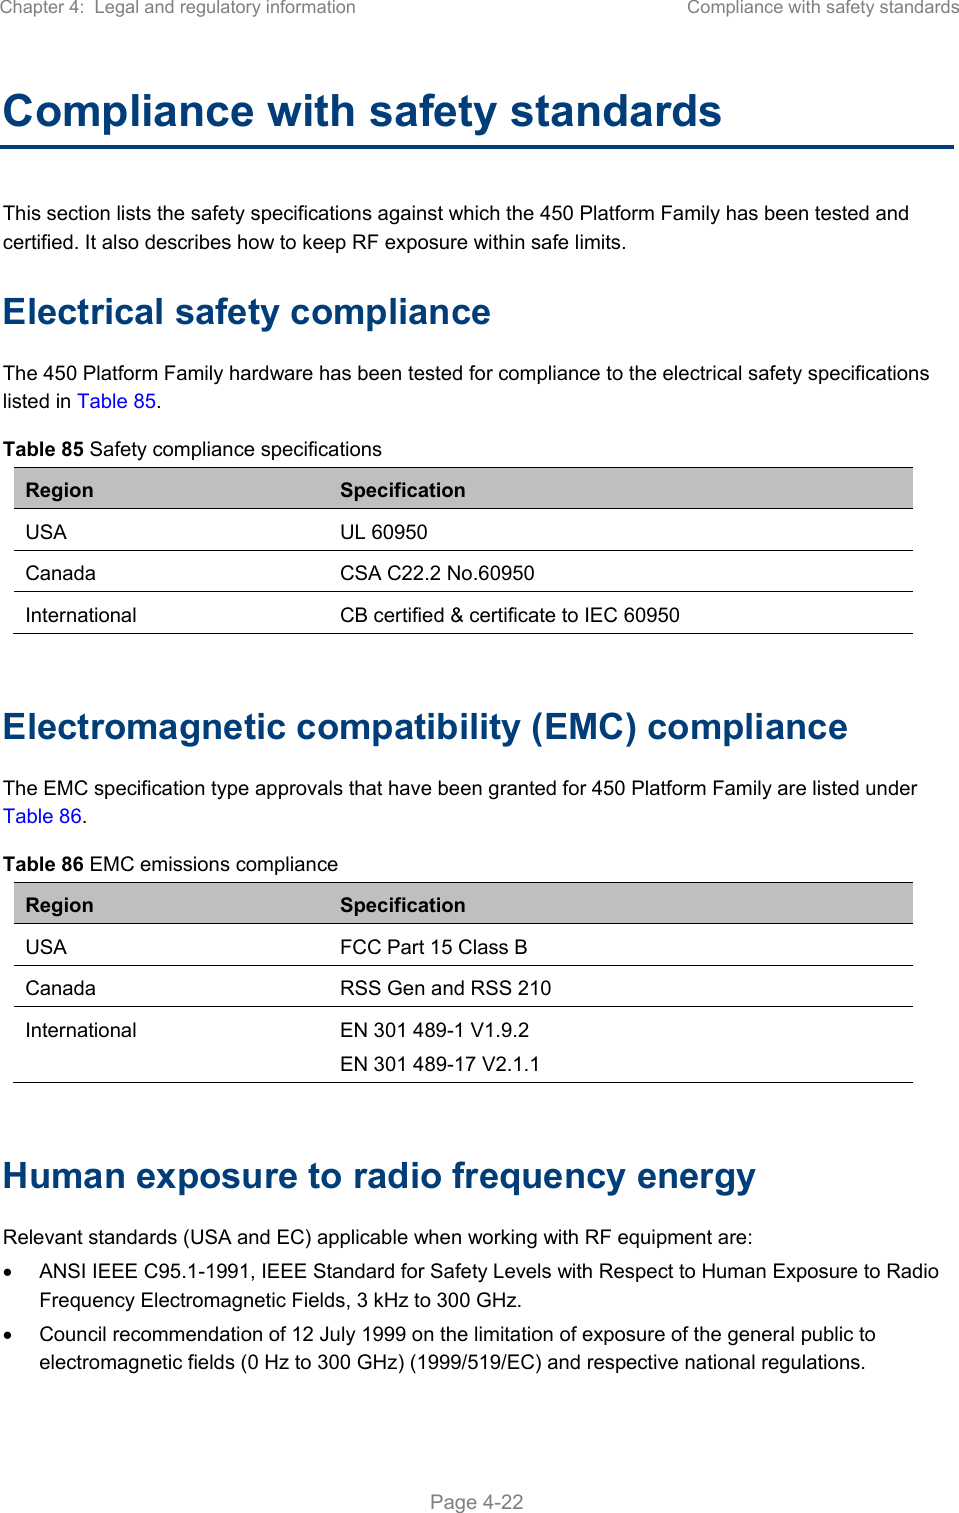 Chapter 4:  Legal and regulatory information  Compliance with safety standards   Page 4-22 Compliance with safety standards This section lists the safety specifications against which the 450 Platform Family has been tested and certified. It also describes how to keep RF exposure within safe limits. Electrical safety compliance  The 450 Platform Family hardware has been tested for compliance to the electrical safety specifications listed in Table 85. Table 85 Safety compliance specifications Region  Specification USA  UL 60950 Canada  CSA C22.2 No.60950 International  CB certified &amp; certificate to IEC 60950  Electromagnetic compatibility (EMC) compliance The EMC specification type approvals that have been granted for 450 Platform Family are listed under Table 86. Table 86 EMC emissions compliance Region  Specification USA  FCC Part 15 Class B Canada  RSS Gen and RSS 210 International  EN 301 489-1 V1.9.2 EN 301 489-17 V2.1.1  Human exposure to radio frequency energy Relevant standards (USA and EC) applicable when working with RF equipment are:   ANSI IEEE C95.1-1991, IEEE Standard for Safety Levels with Respect to Human Exposure to Radio Frequency Electromagnetic Fields, 3 kHz to 300 GHz.   Council recommendation of 12 July 1999 on the limitation of exposure of the general public to electromagnetic fields (0 Hz to 300 GHz) (1999/519/EC) and respective national regulations. 